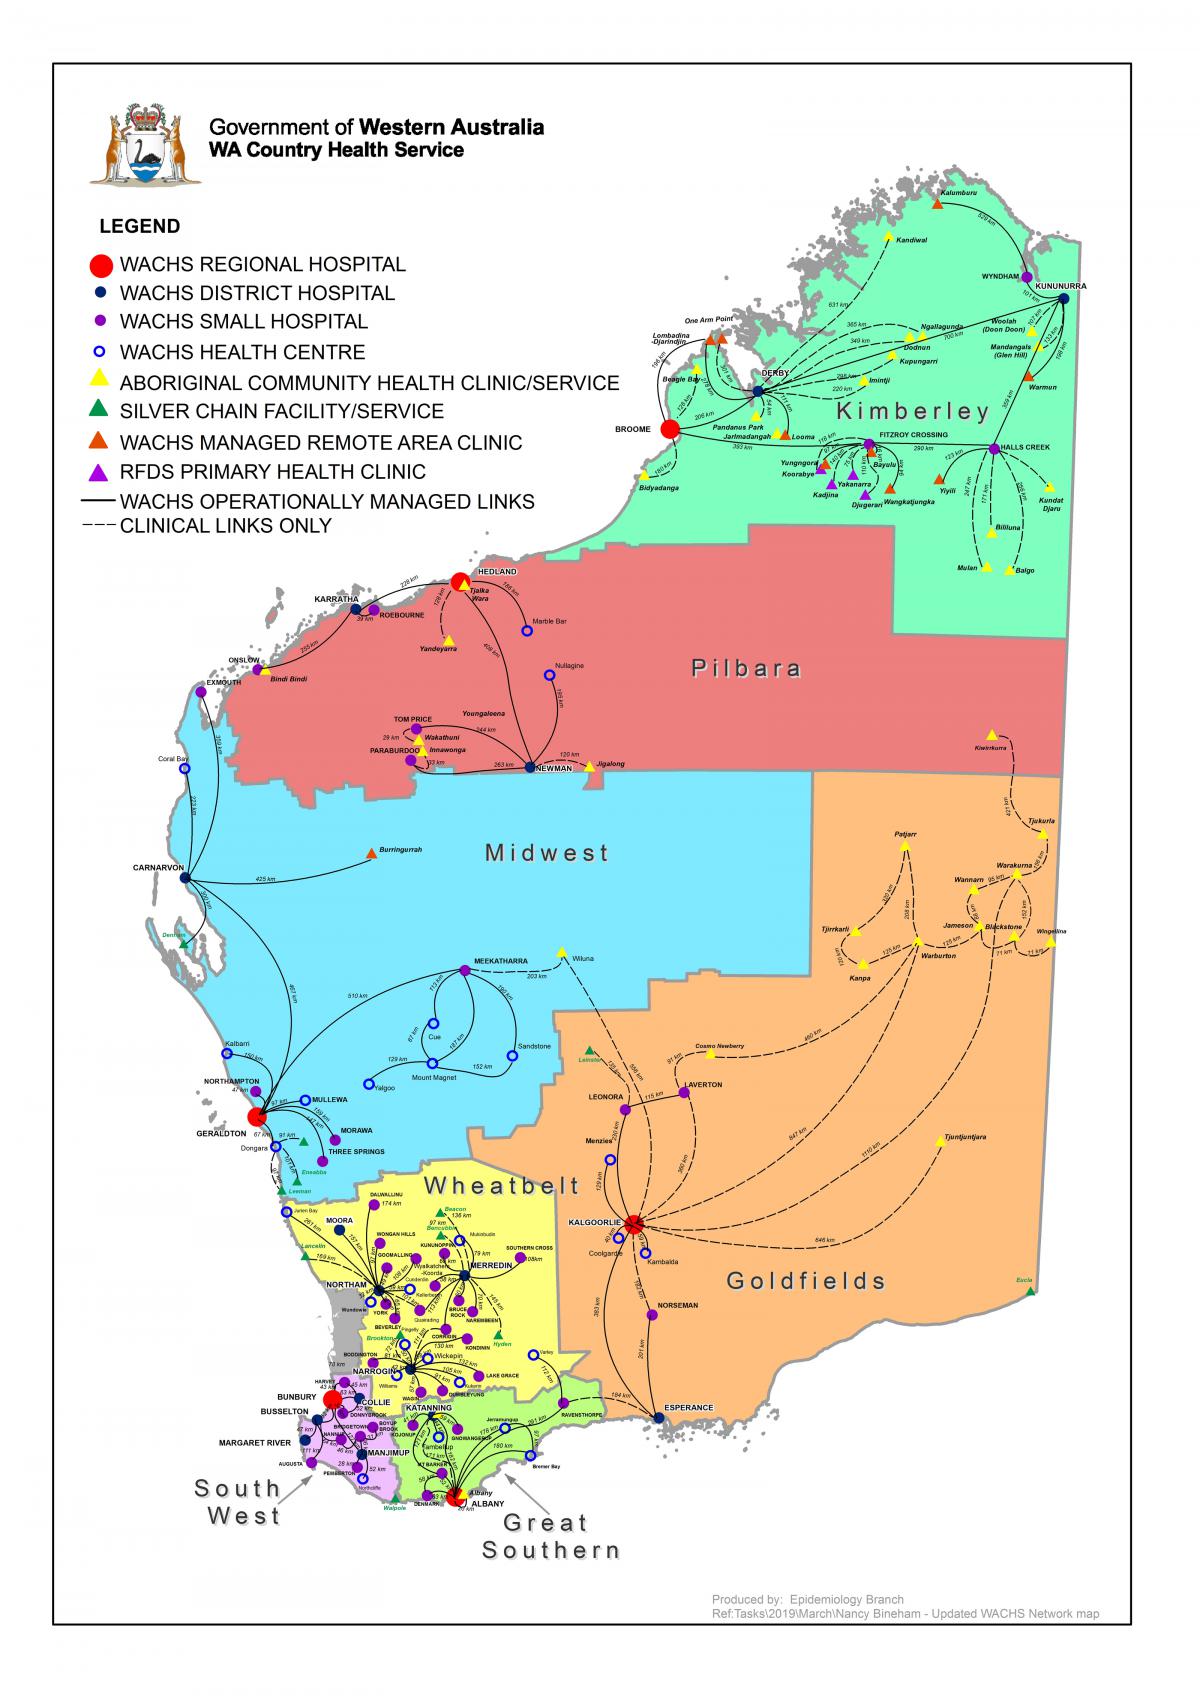 Map of all regions in WA including Kimberley, Pilbara, Midwest, Goldfields, Wheatbelt, Great Southern and South West.